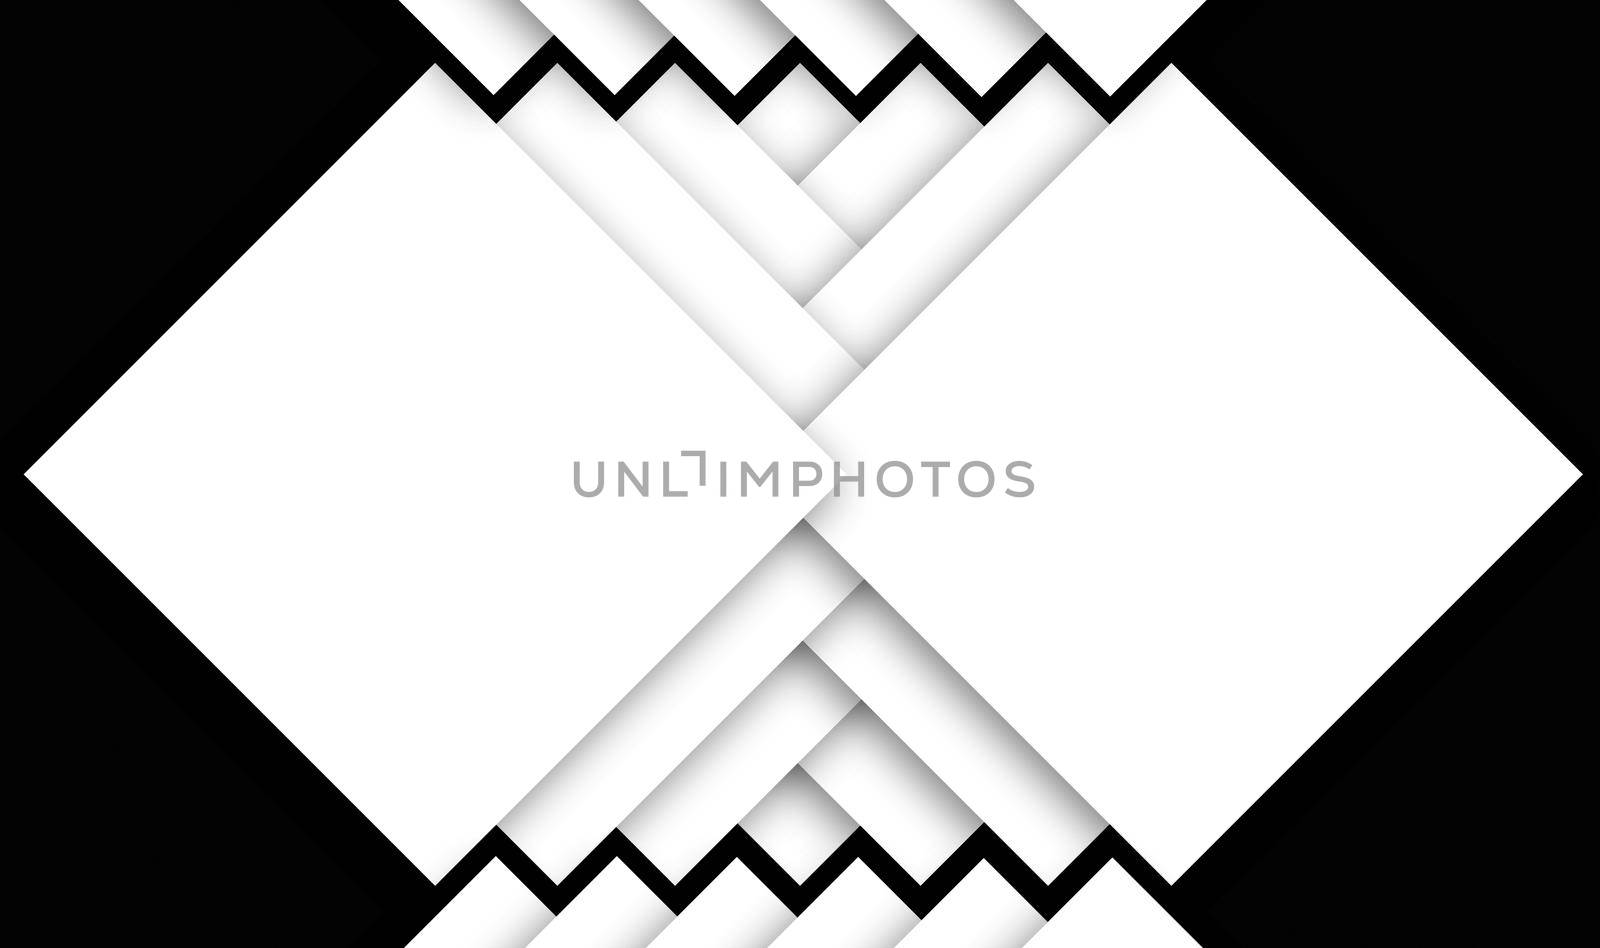 abstract concept design made of squares creating design by overlapping on each other and tilted upside down creating zig zag in the negative space in gray isolated background with soft shadow, layered image ready to print for cards, invitation, design print